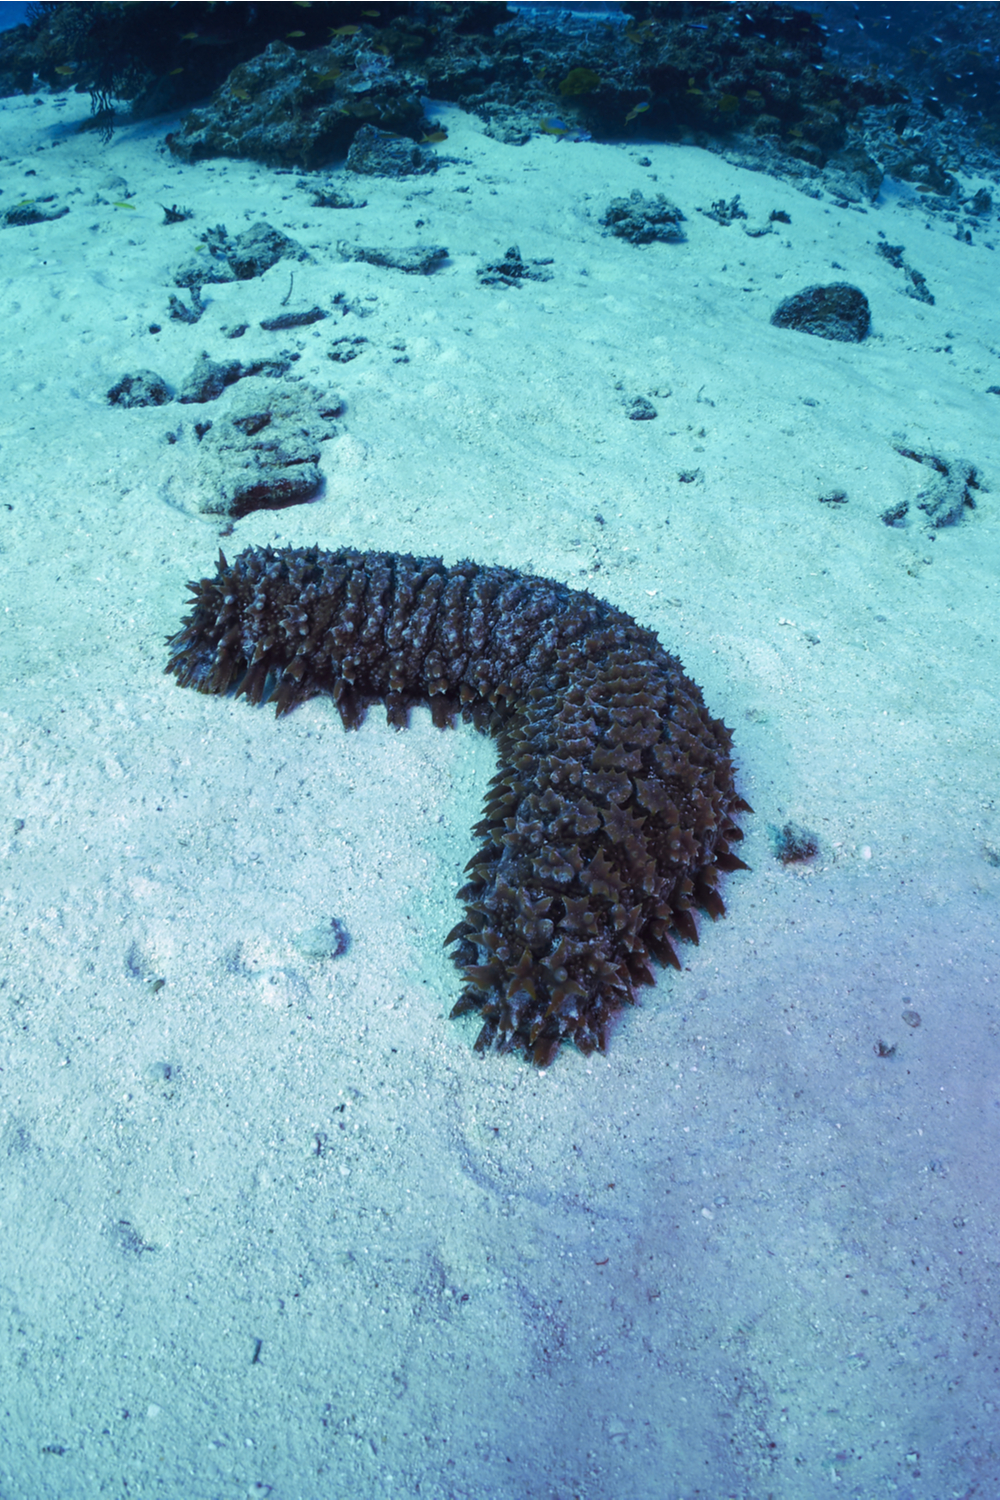 What Do Sea Cucumbers Eat In The Wild